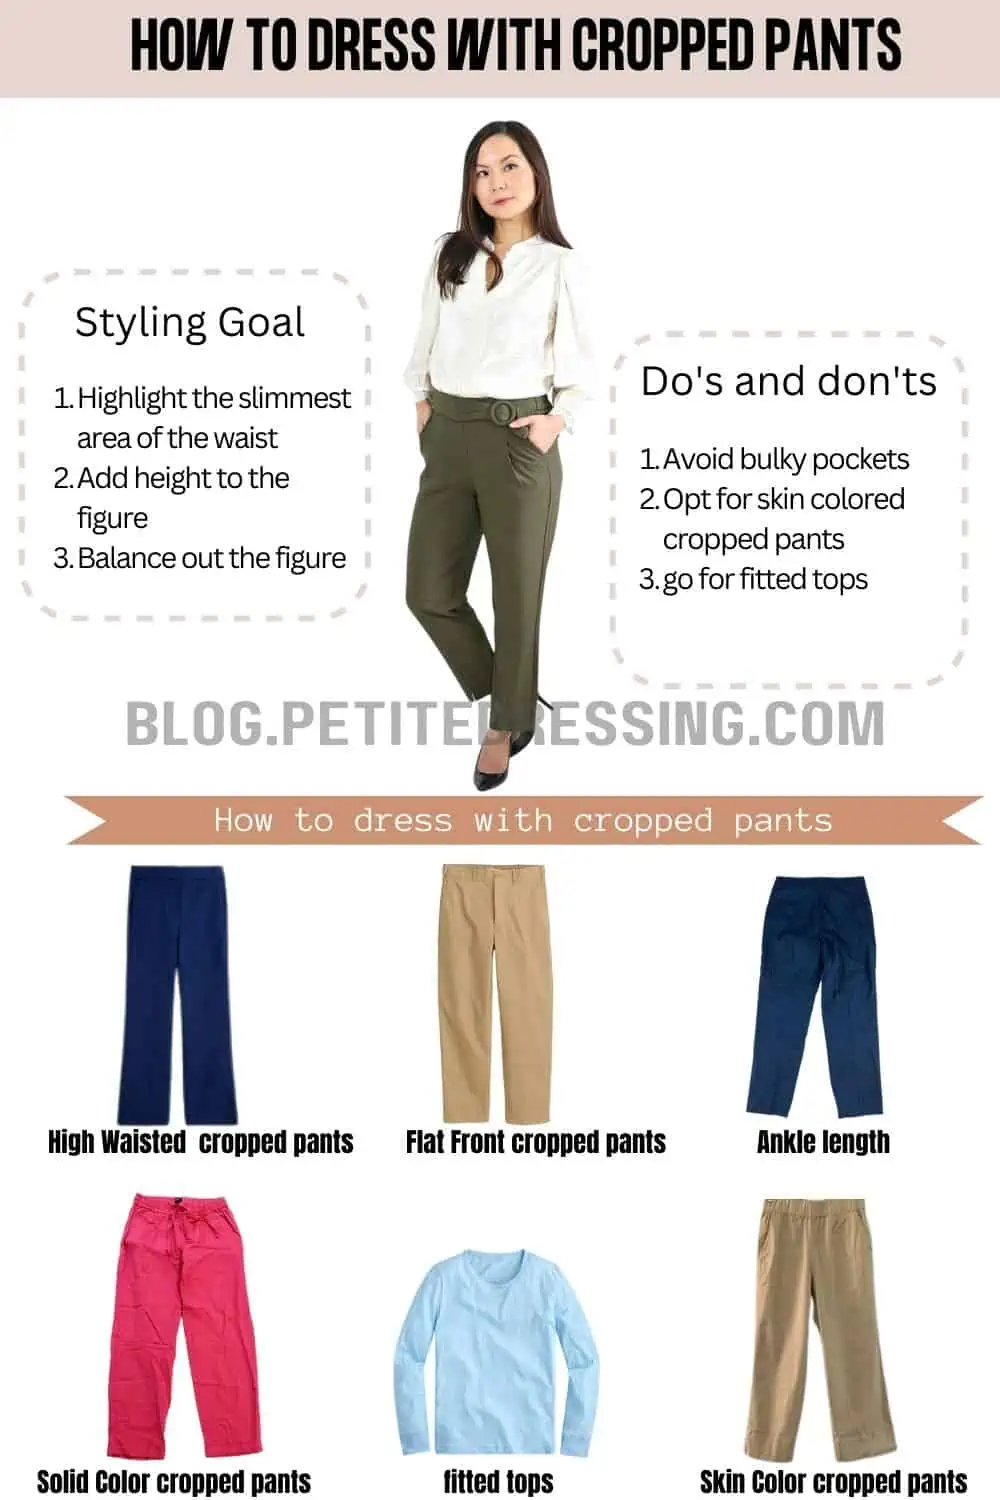 The Complete Cropped Pants Guide for Short Women - Petite Dressing